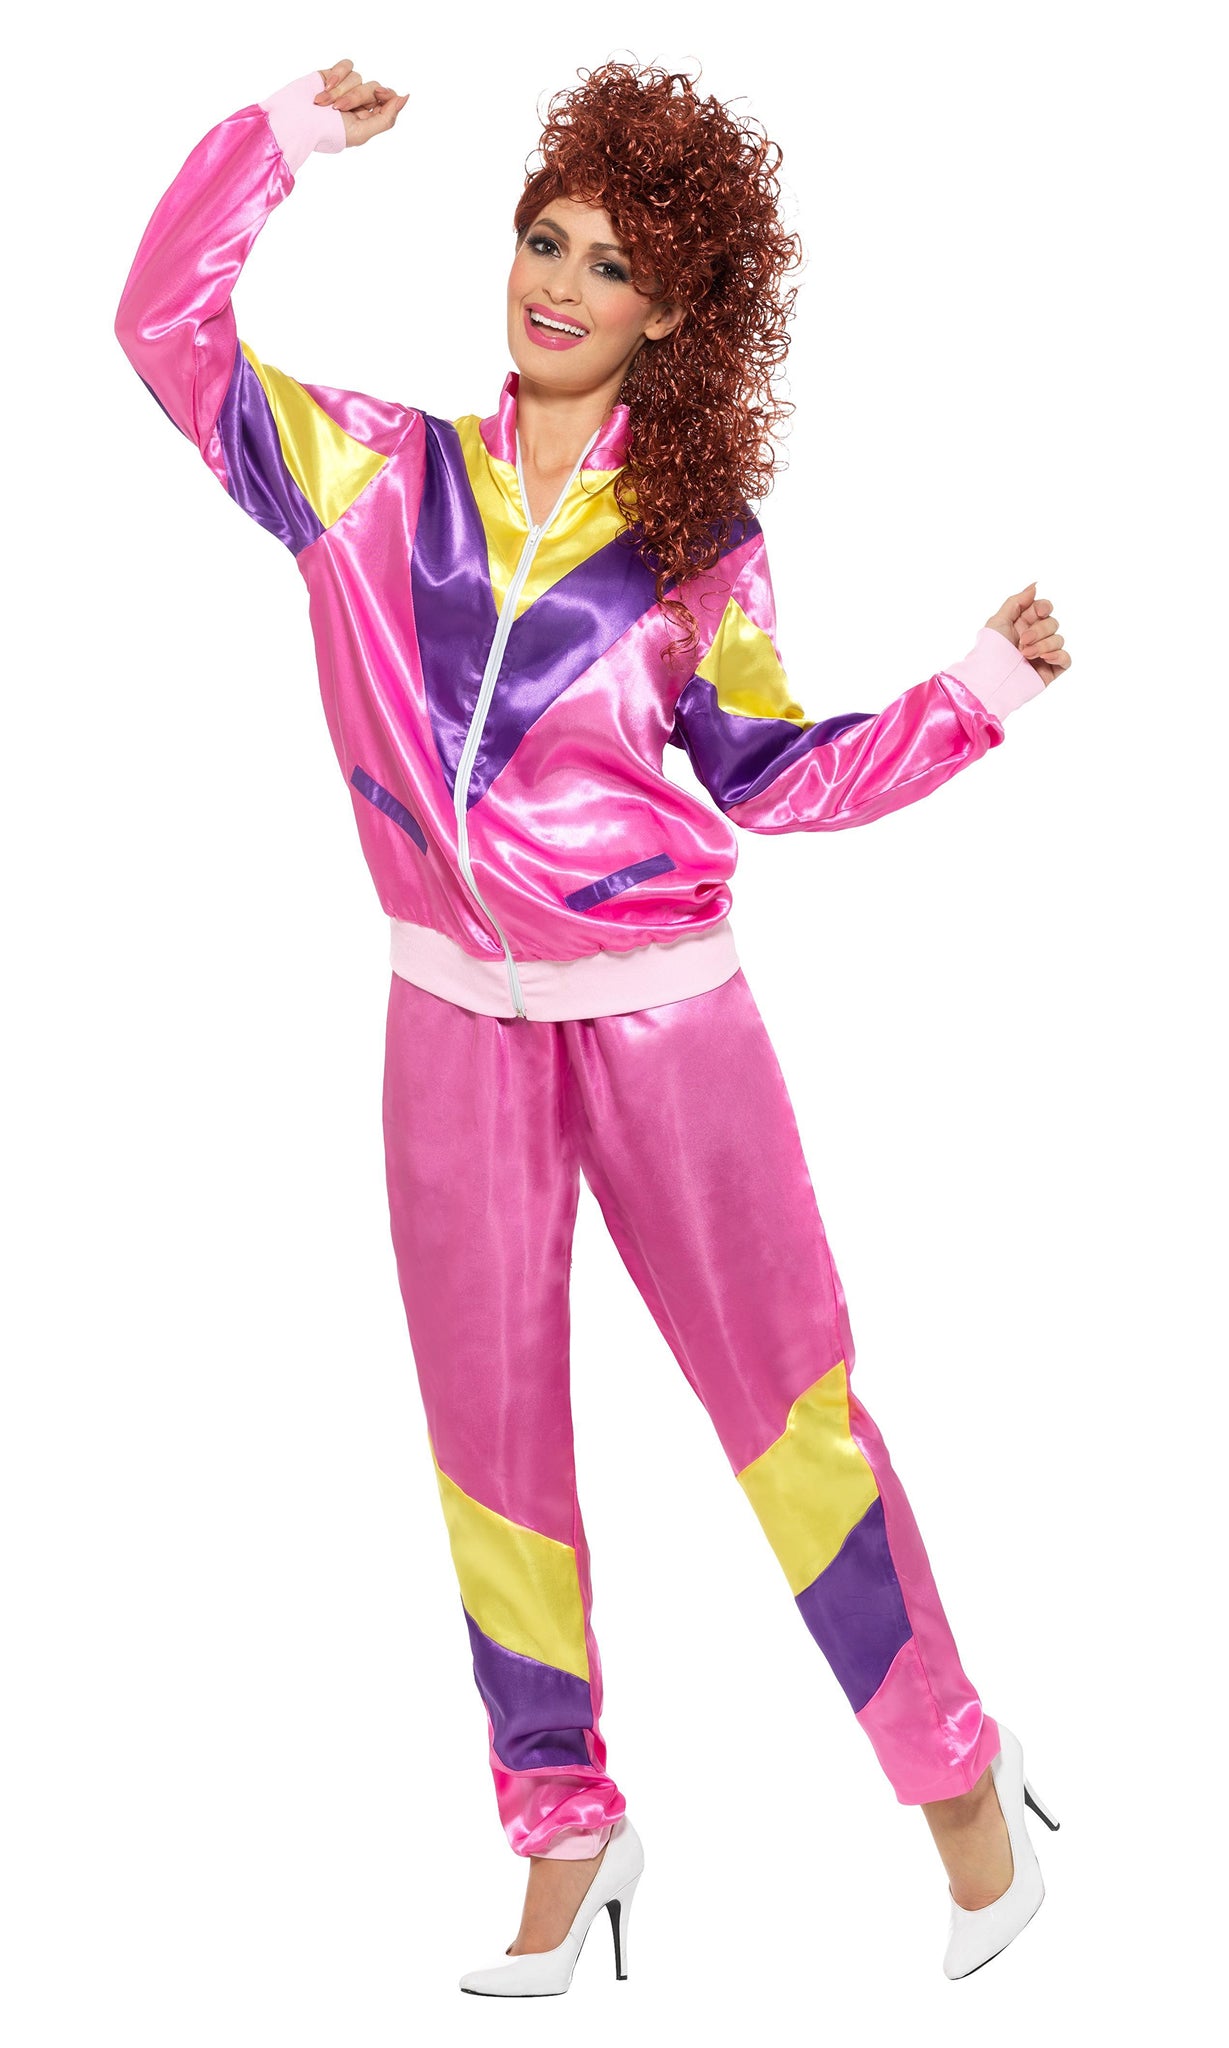 Alternate view of pink, purple and yellow 80s shell suit